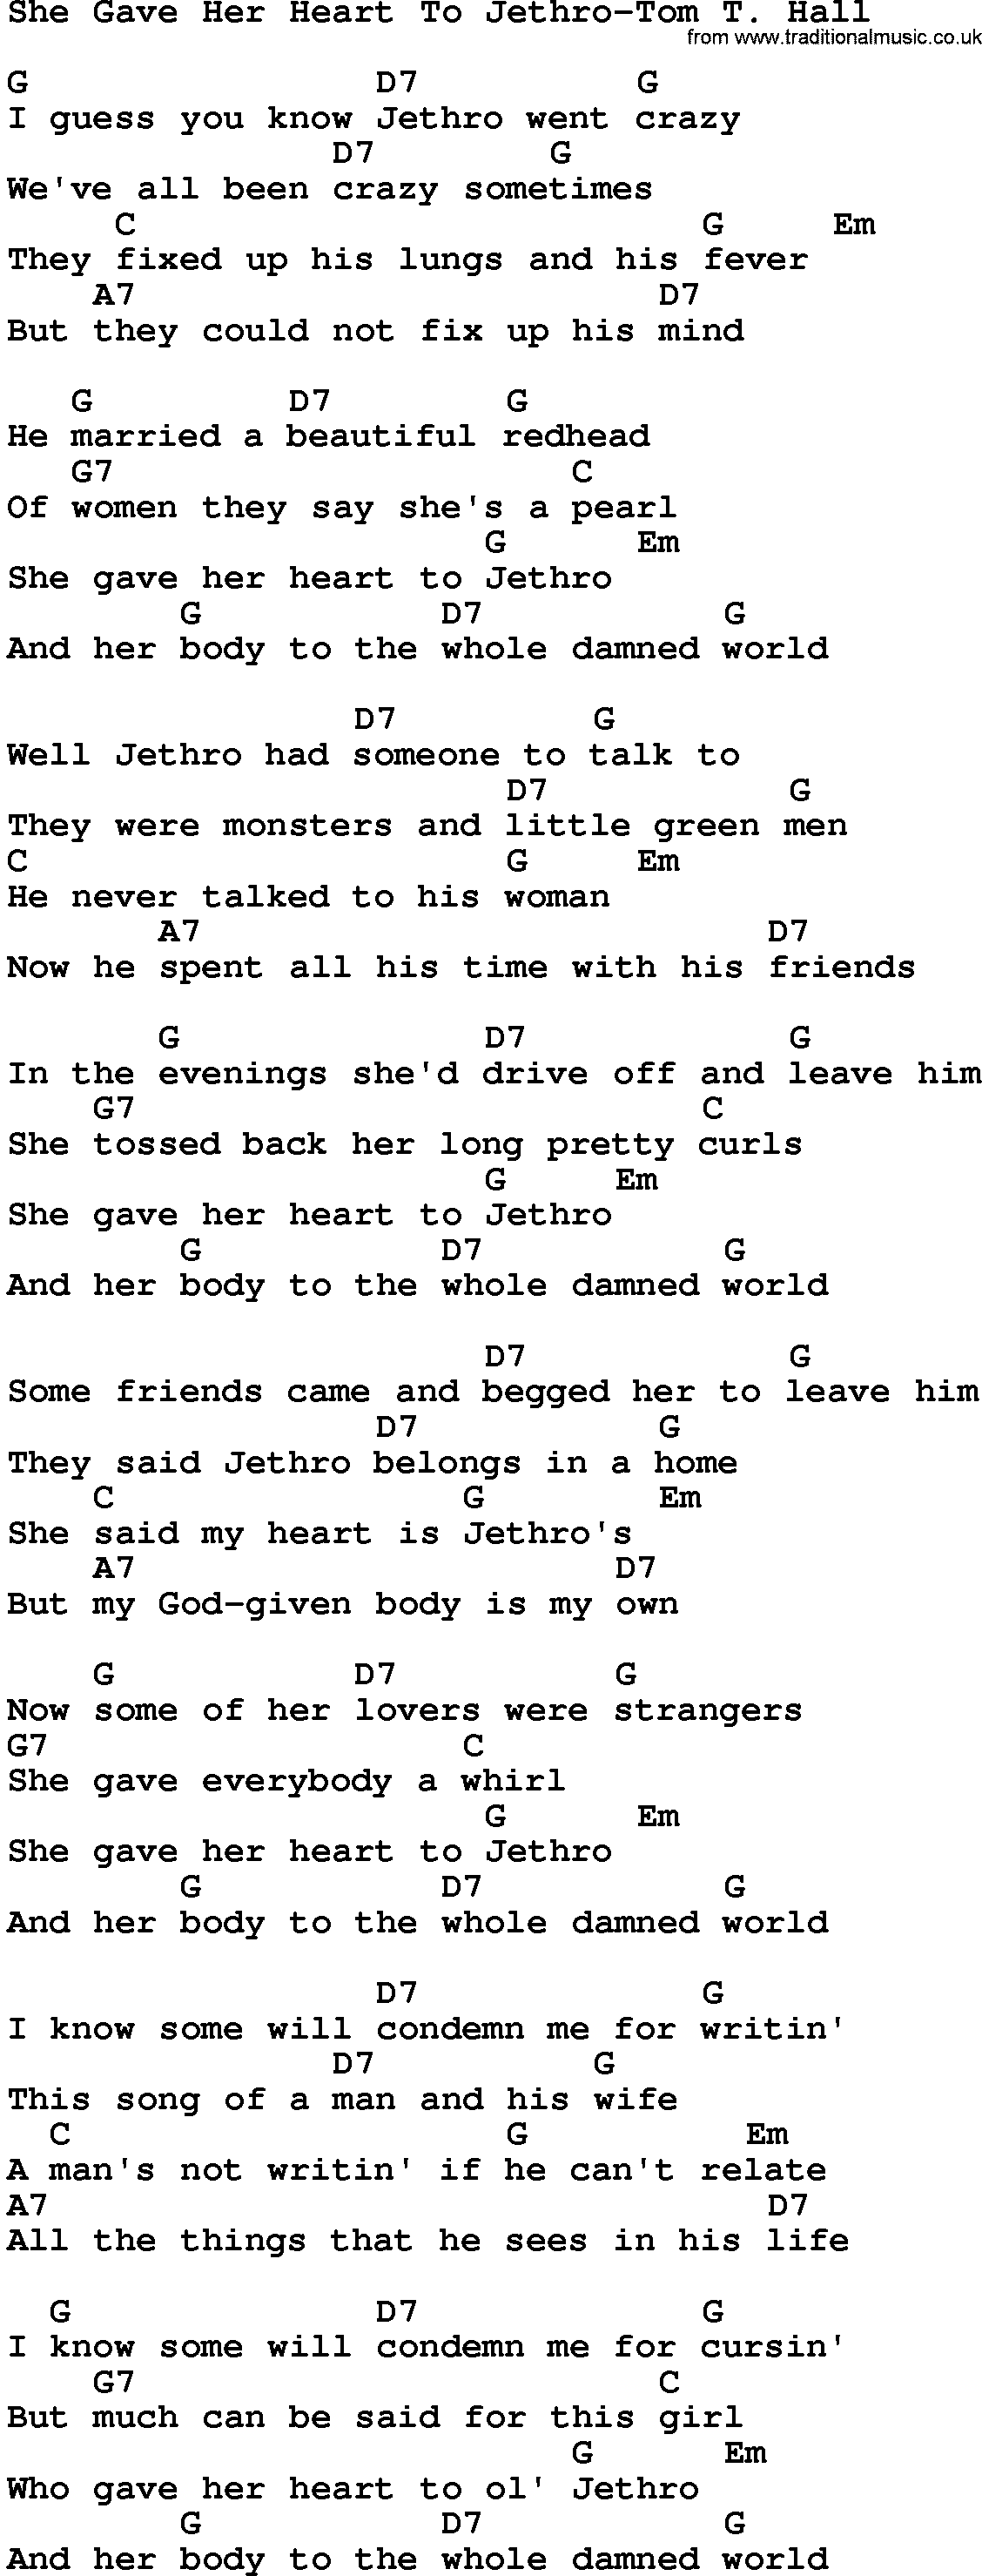 Country music song: She Gave Her Heart To Jethro-Tom T Hall lyrics and chords